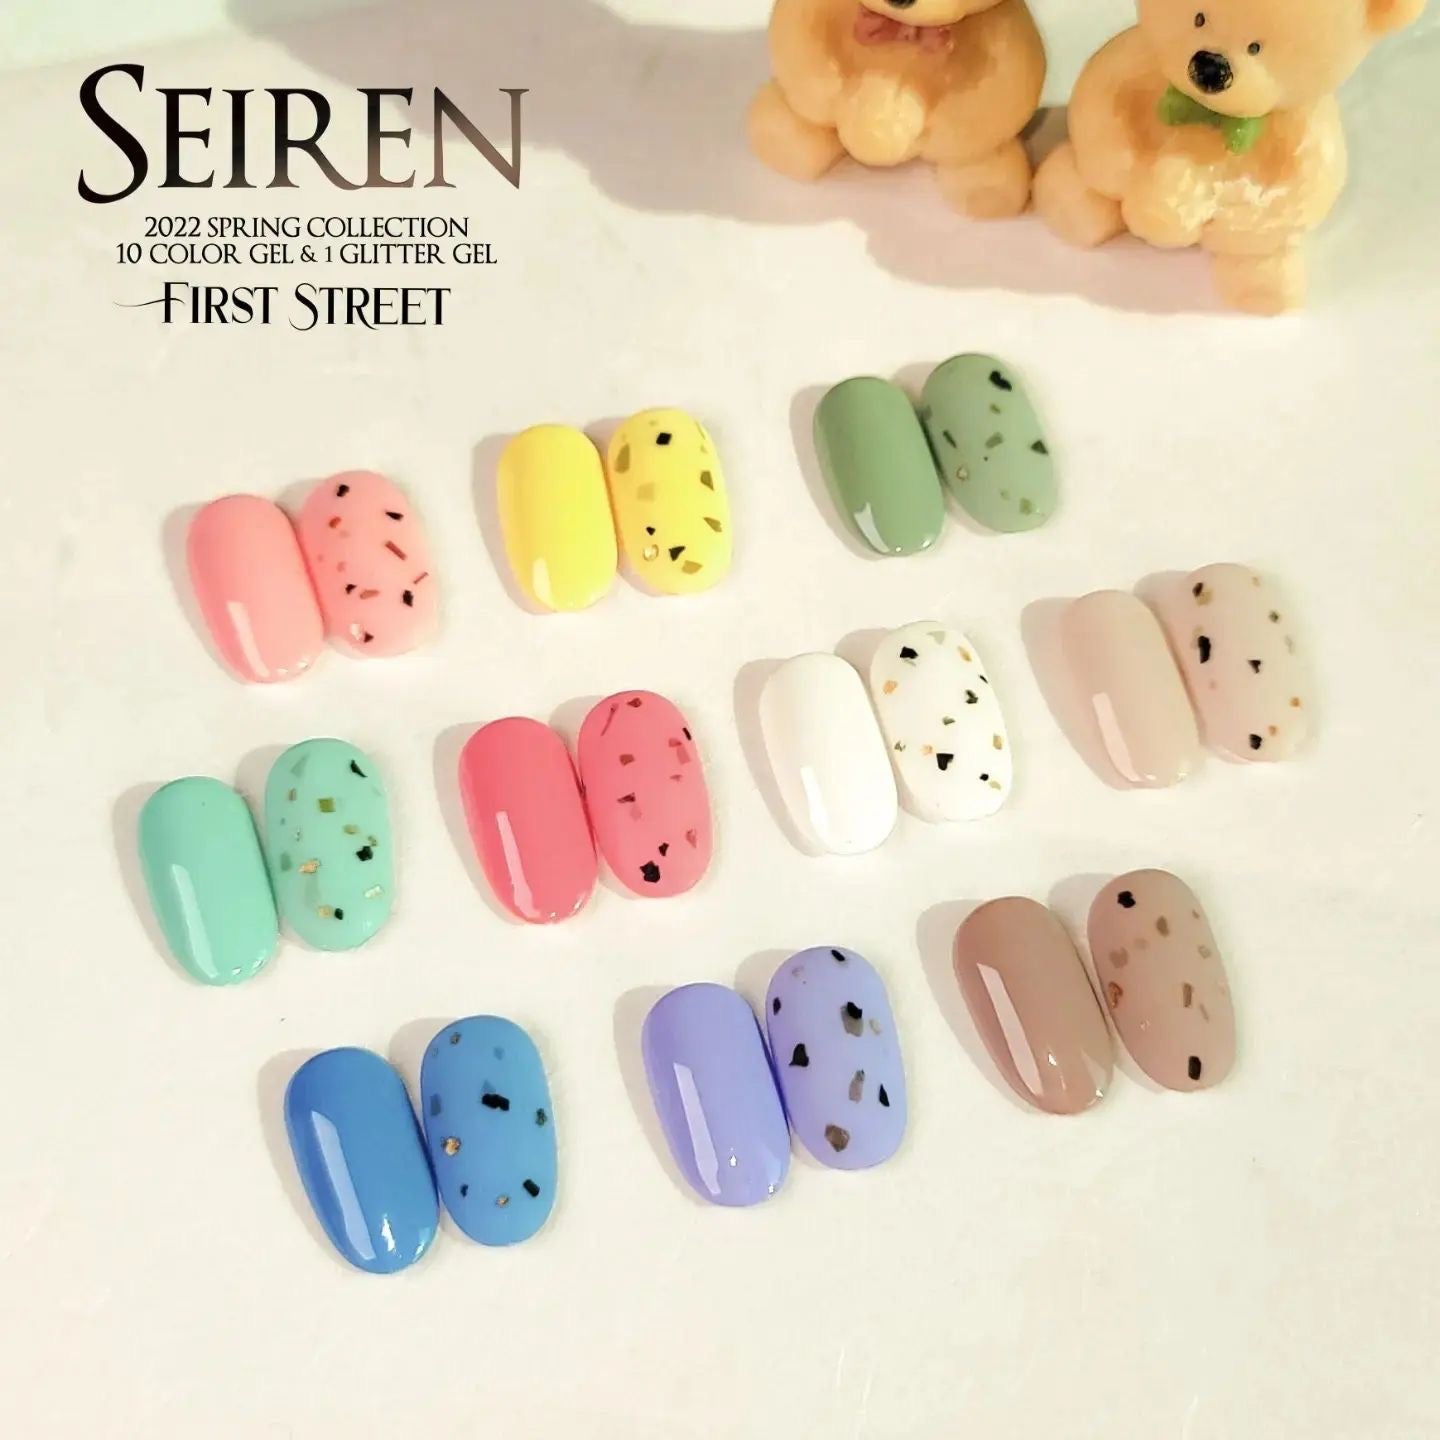 FIRST STREET Seiren 11pc collection + limited edition gifts